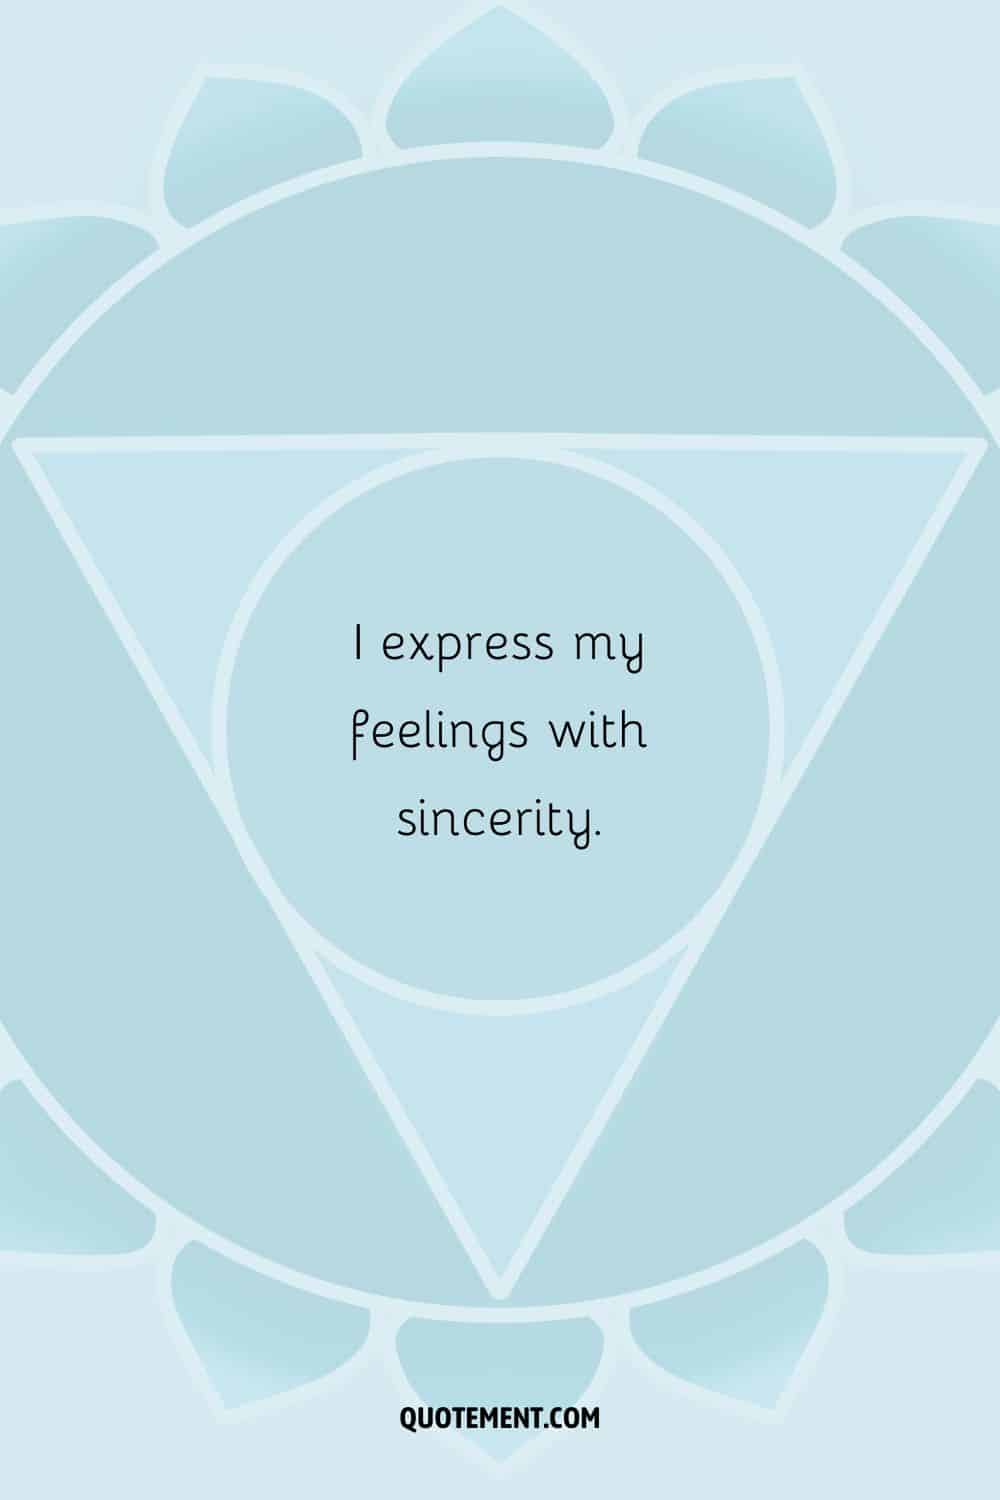 “I express my feelings with sincerity.”